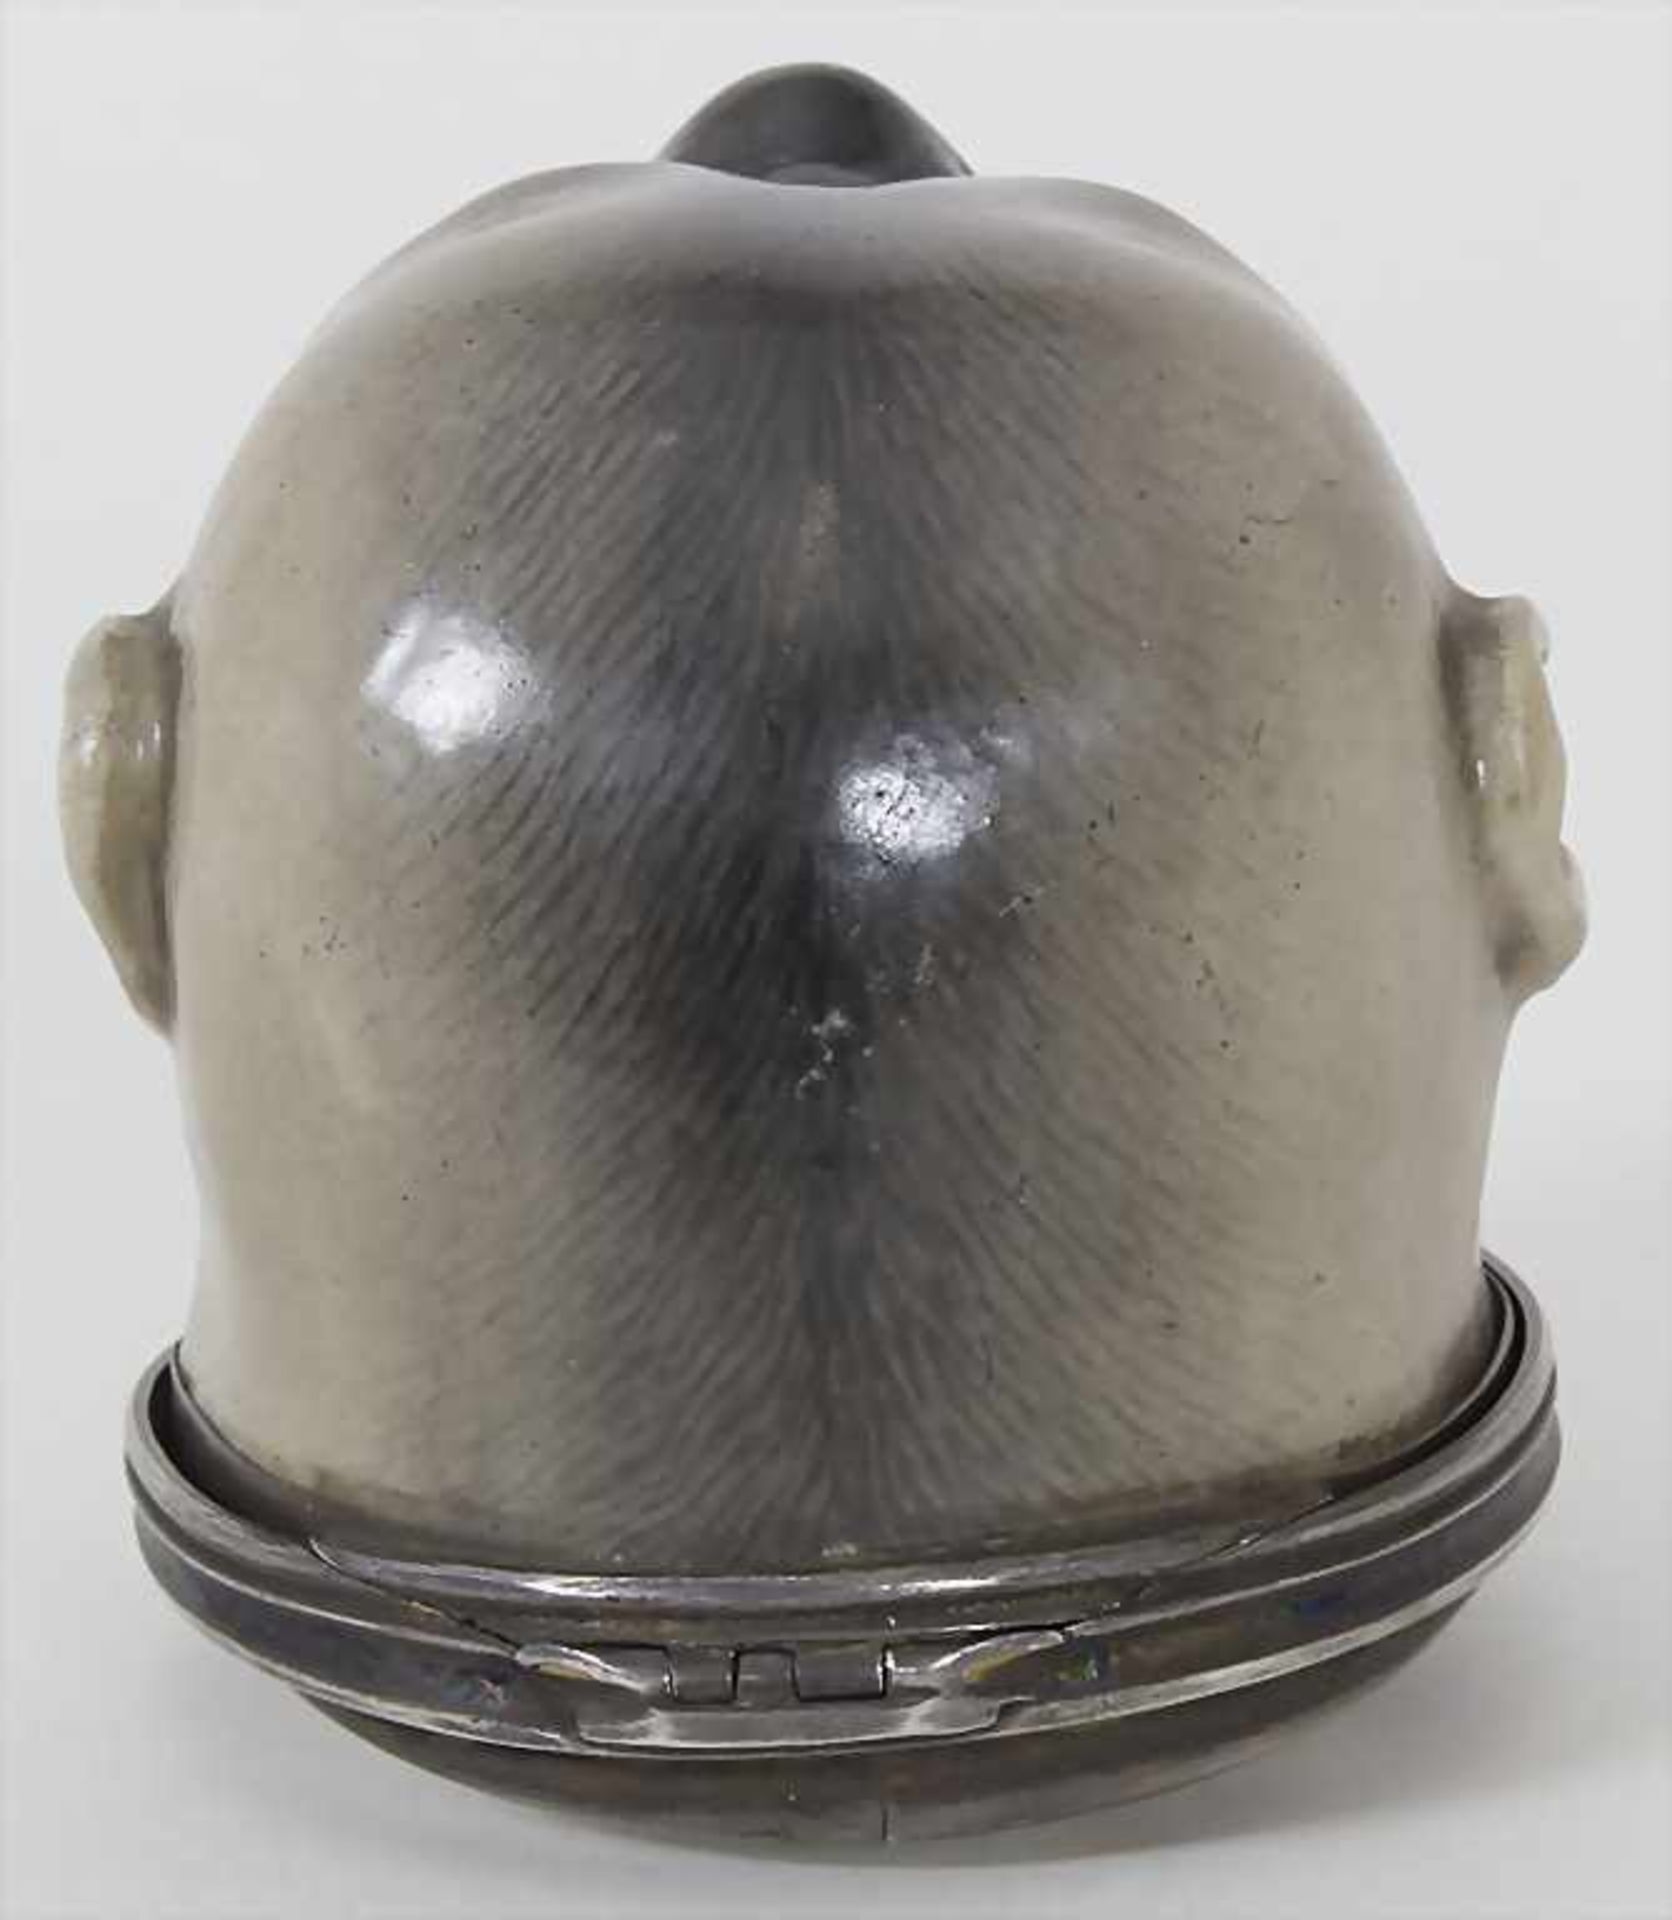 Tabatiere 'Mopskopf' / A snuff-box in the form of a pug's head, Meissen, um 1750Material: Porzellan, - Image 7 of 11